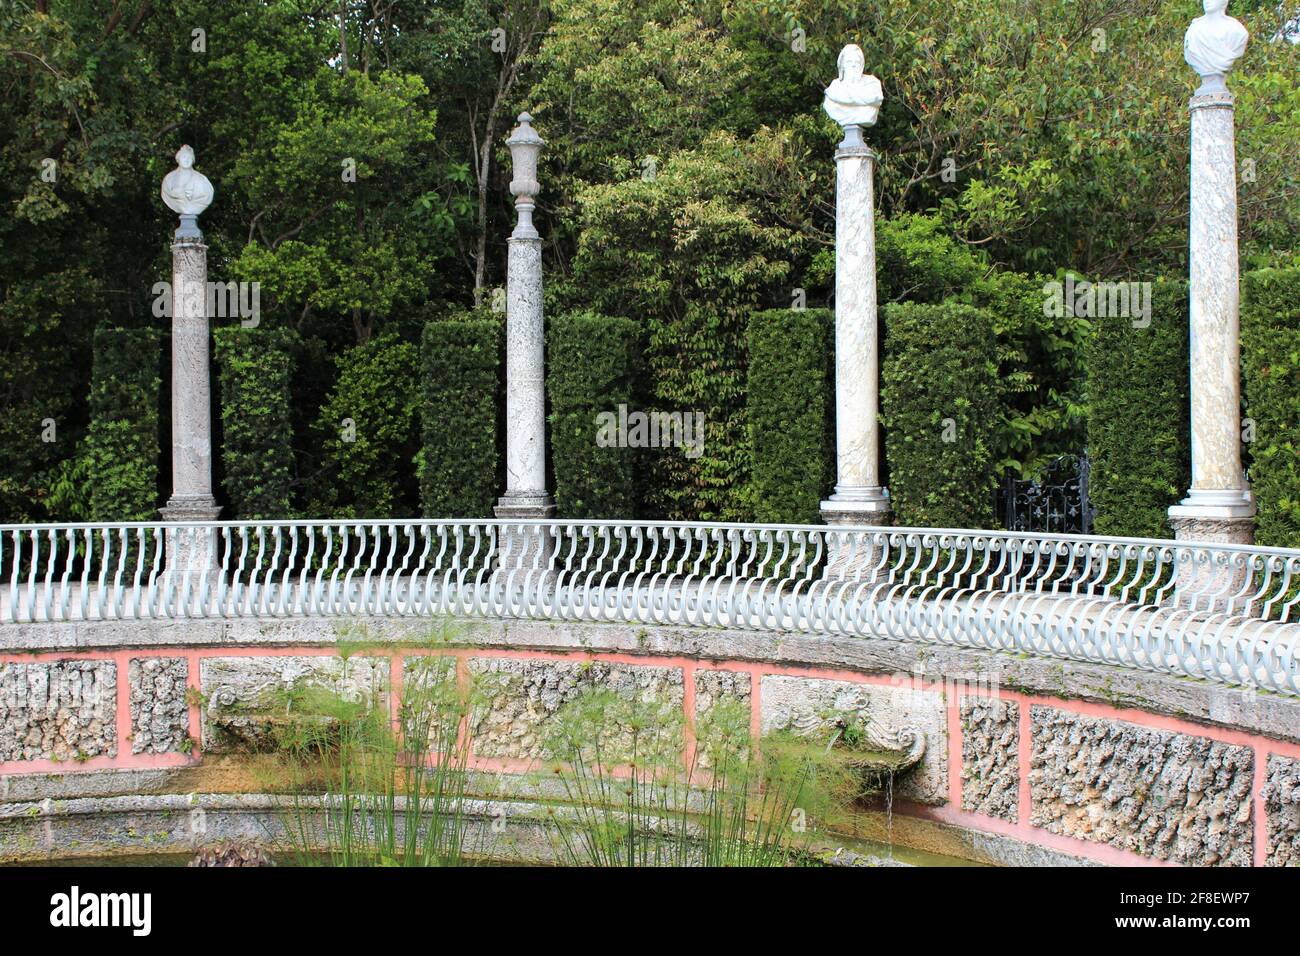 Pillars at the outdoor garden with sculpture busts at The Vizcaya Museum and Garden. Stock Photo